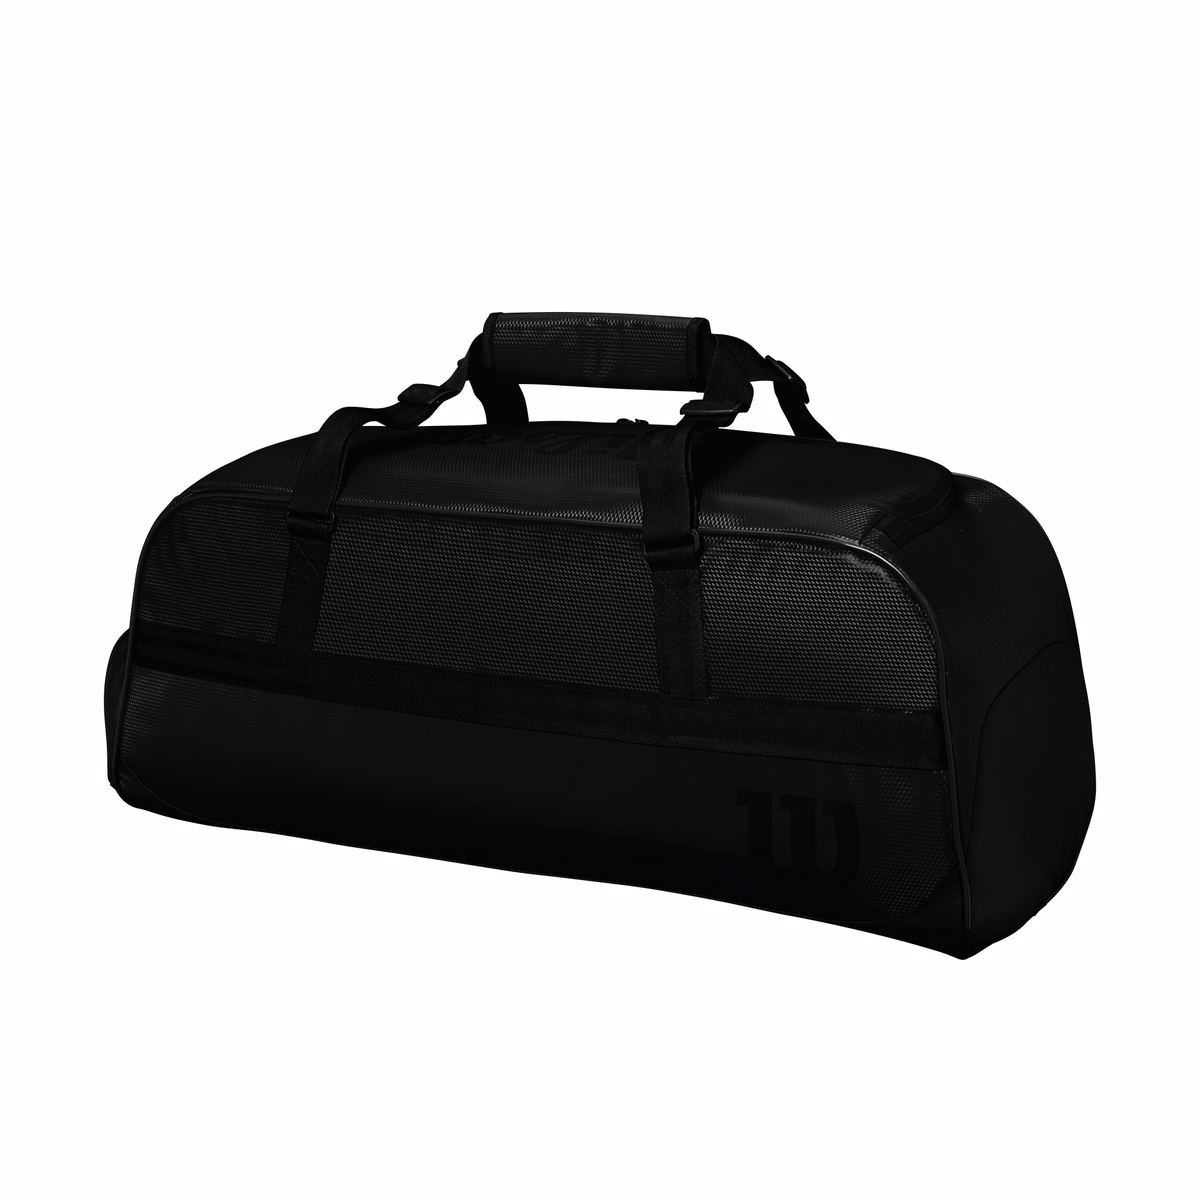 WR8002701_1_Tour_Duffle_Black_Back.png.high-res_1200x1200